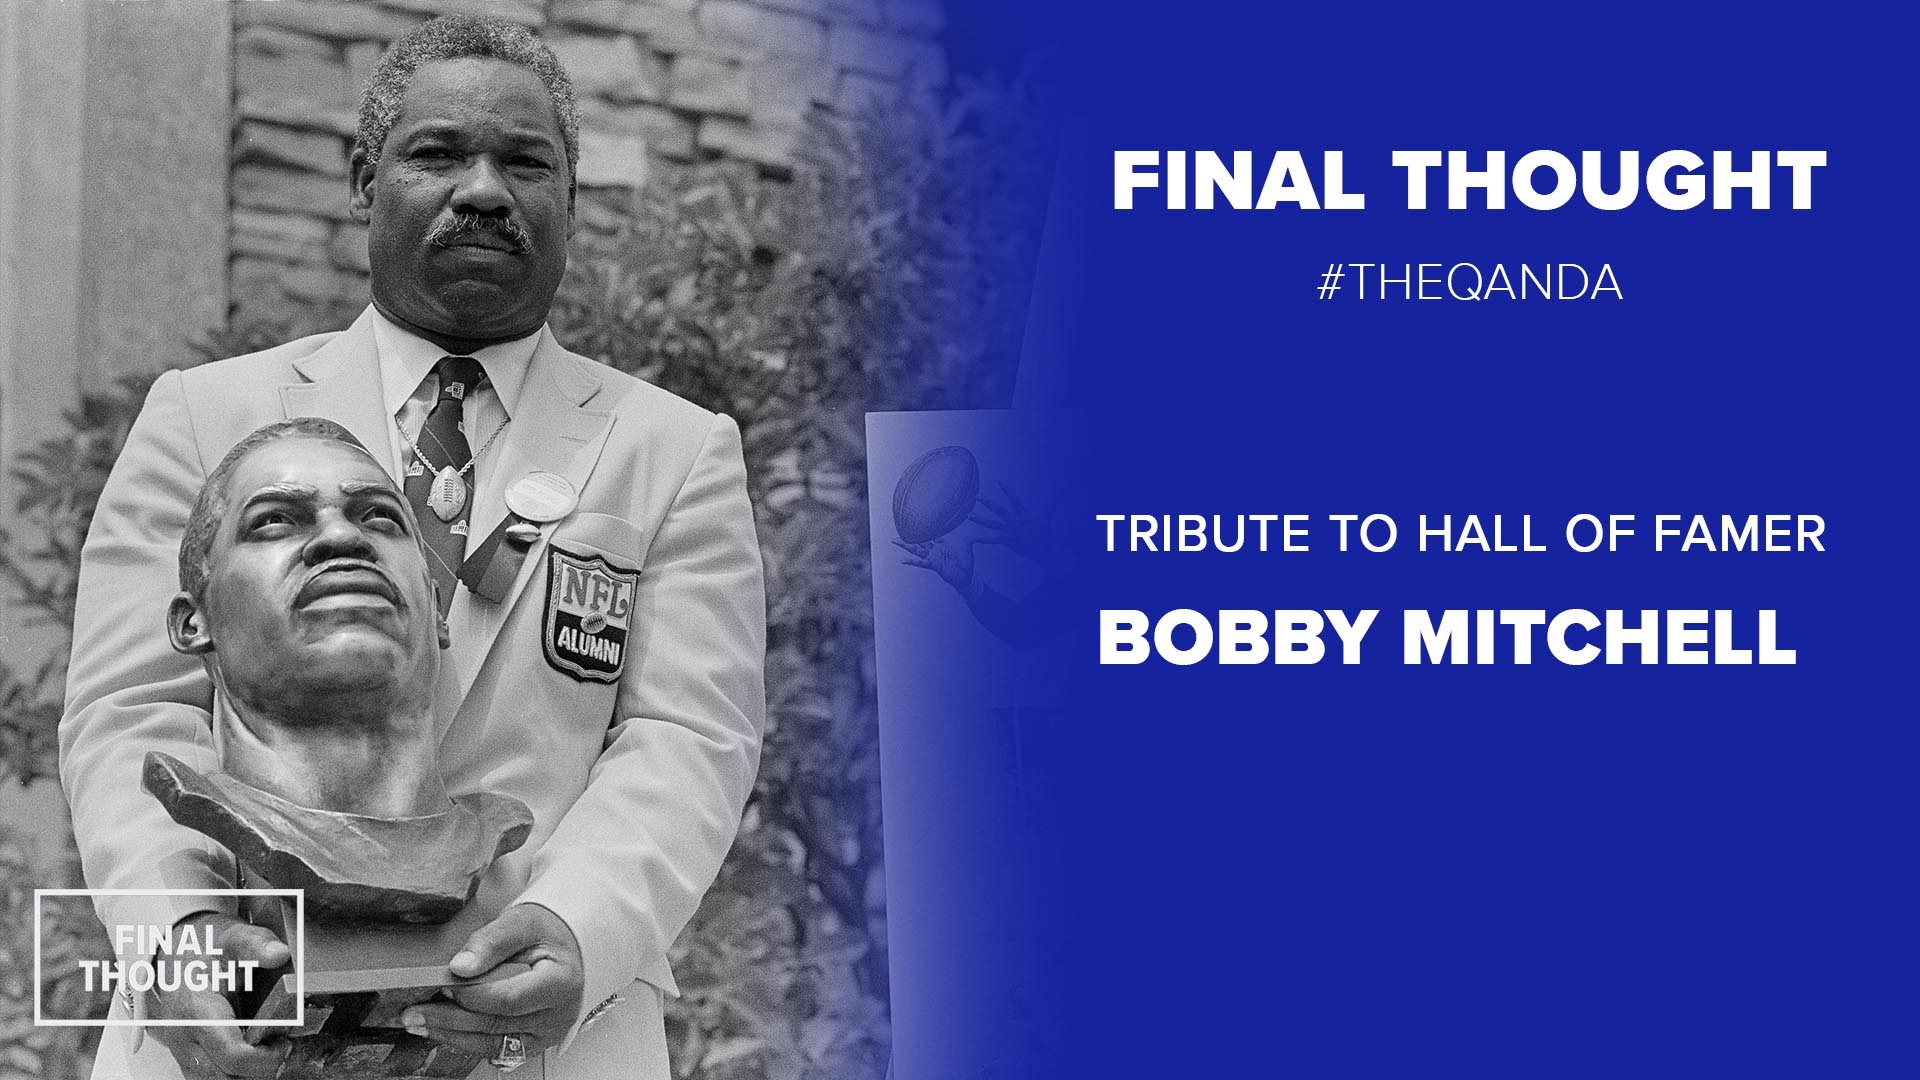 In his Final Thought, Bruce dwells on not letting COVID-19 rob us of honoring those who have passed away. He pays tribute to Footballer Bobby Mitchell